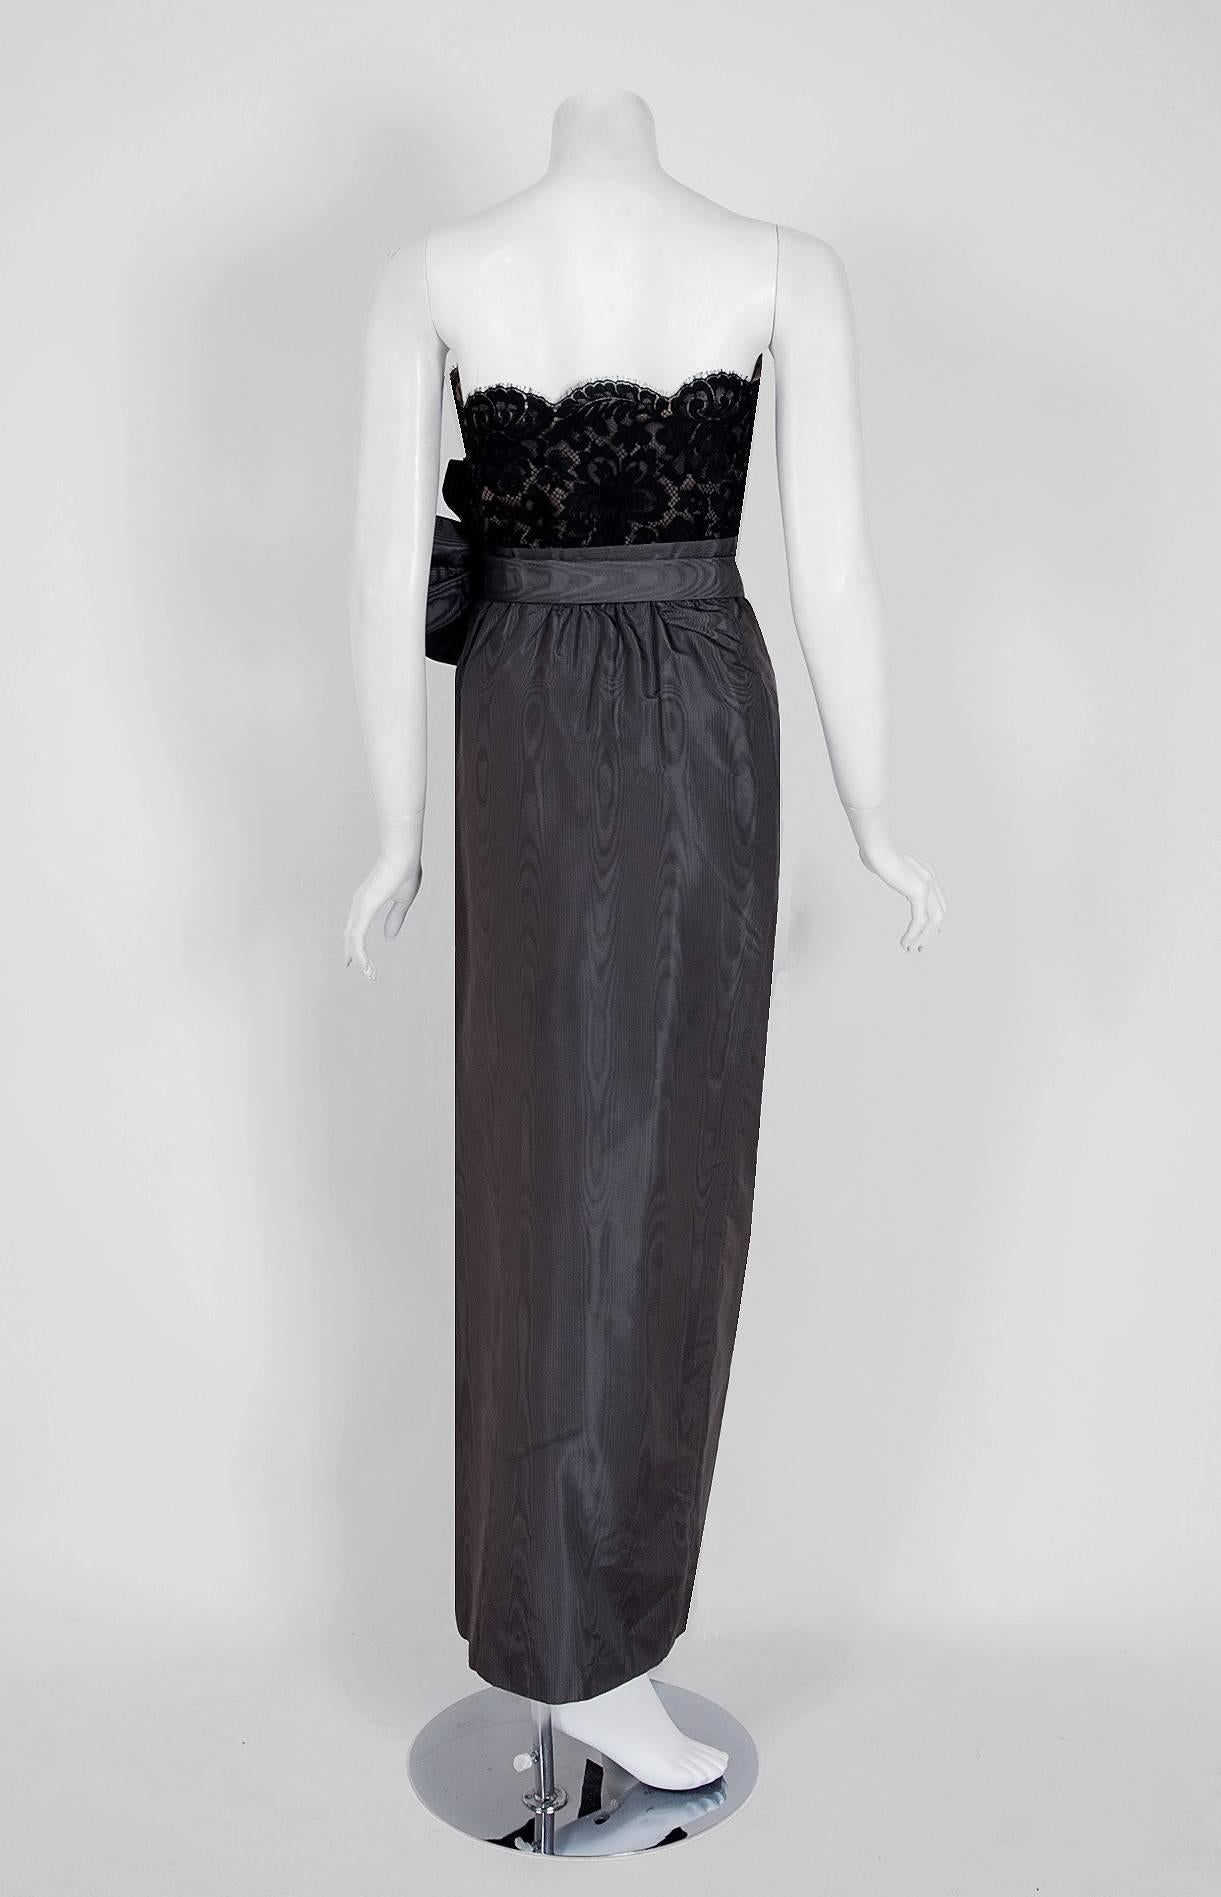 Women's 1982 Christian Dior Haute-Couture Lace Illusion & Charcoal Silk Strapless Gown